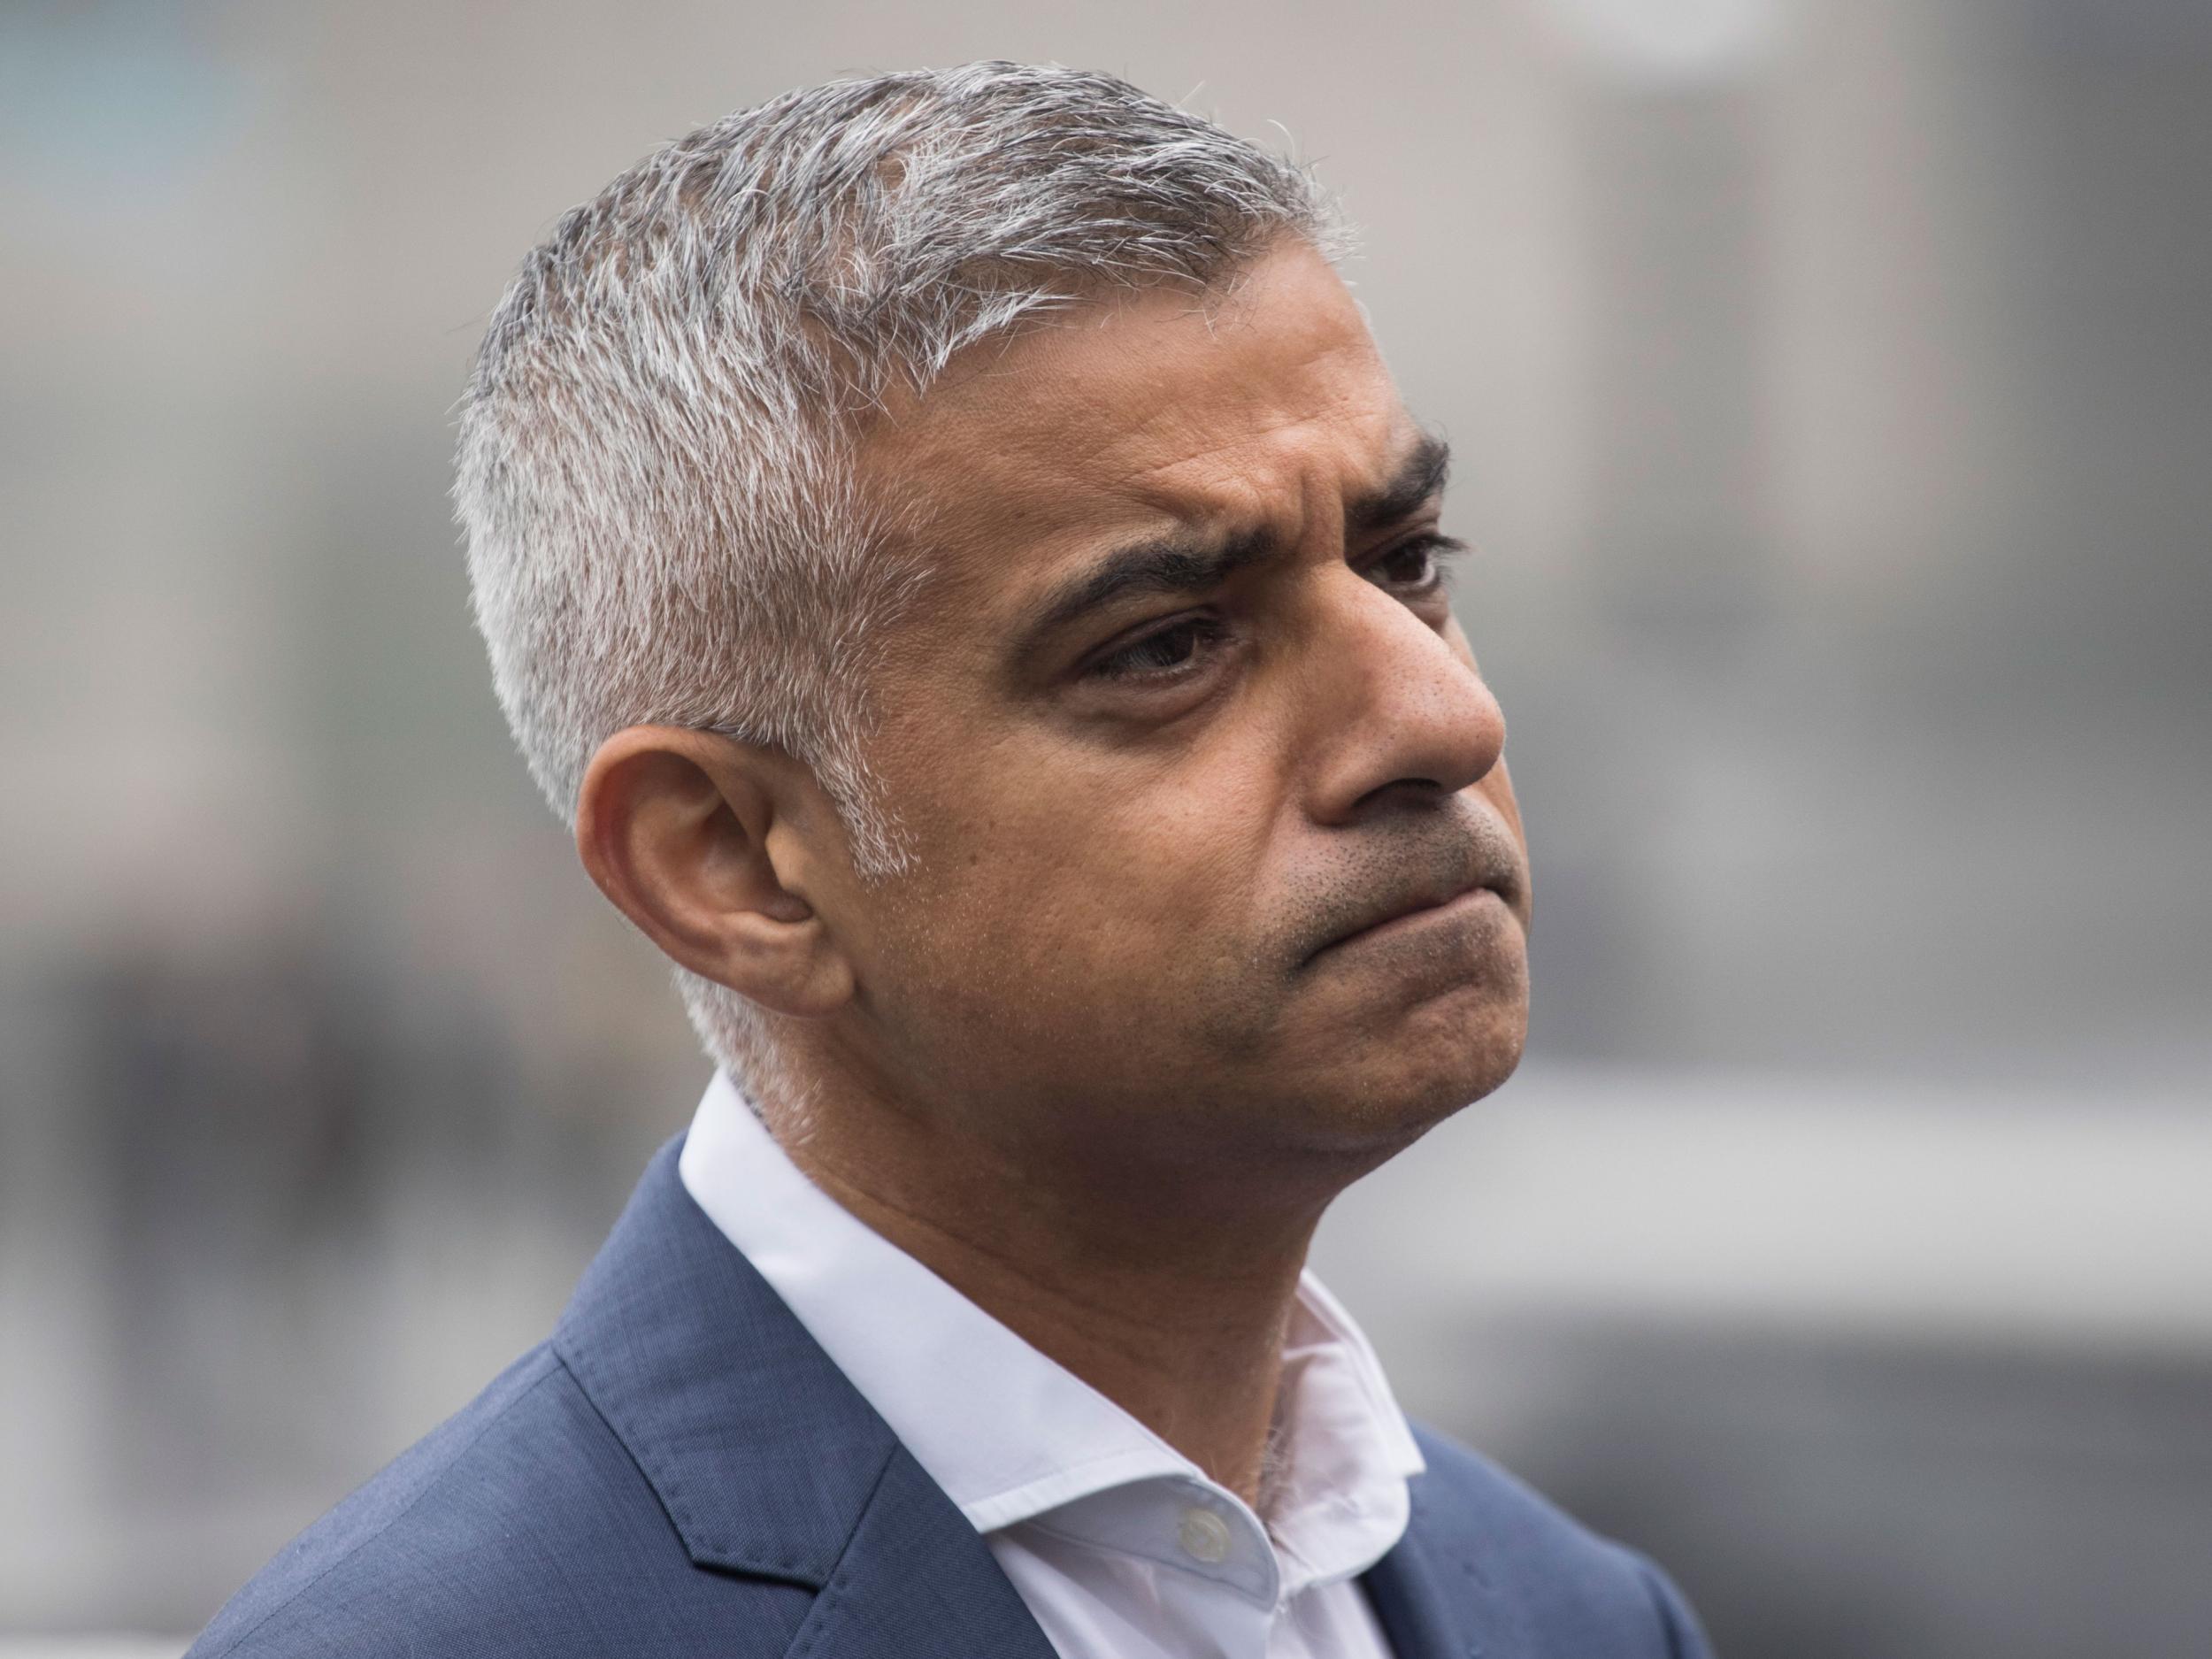 Budget 2017: Londoners cannot be kept safe unless huge police cuts are reversed, says Sadiq Khan